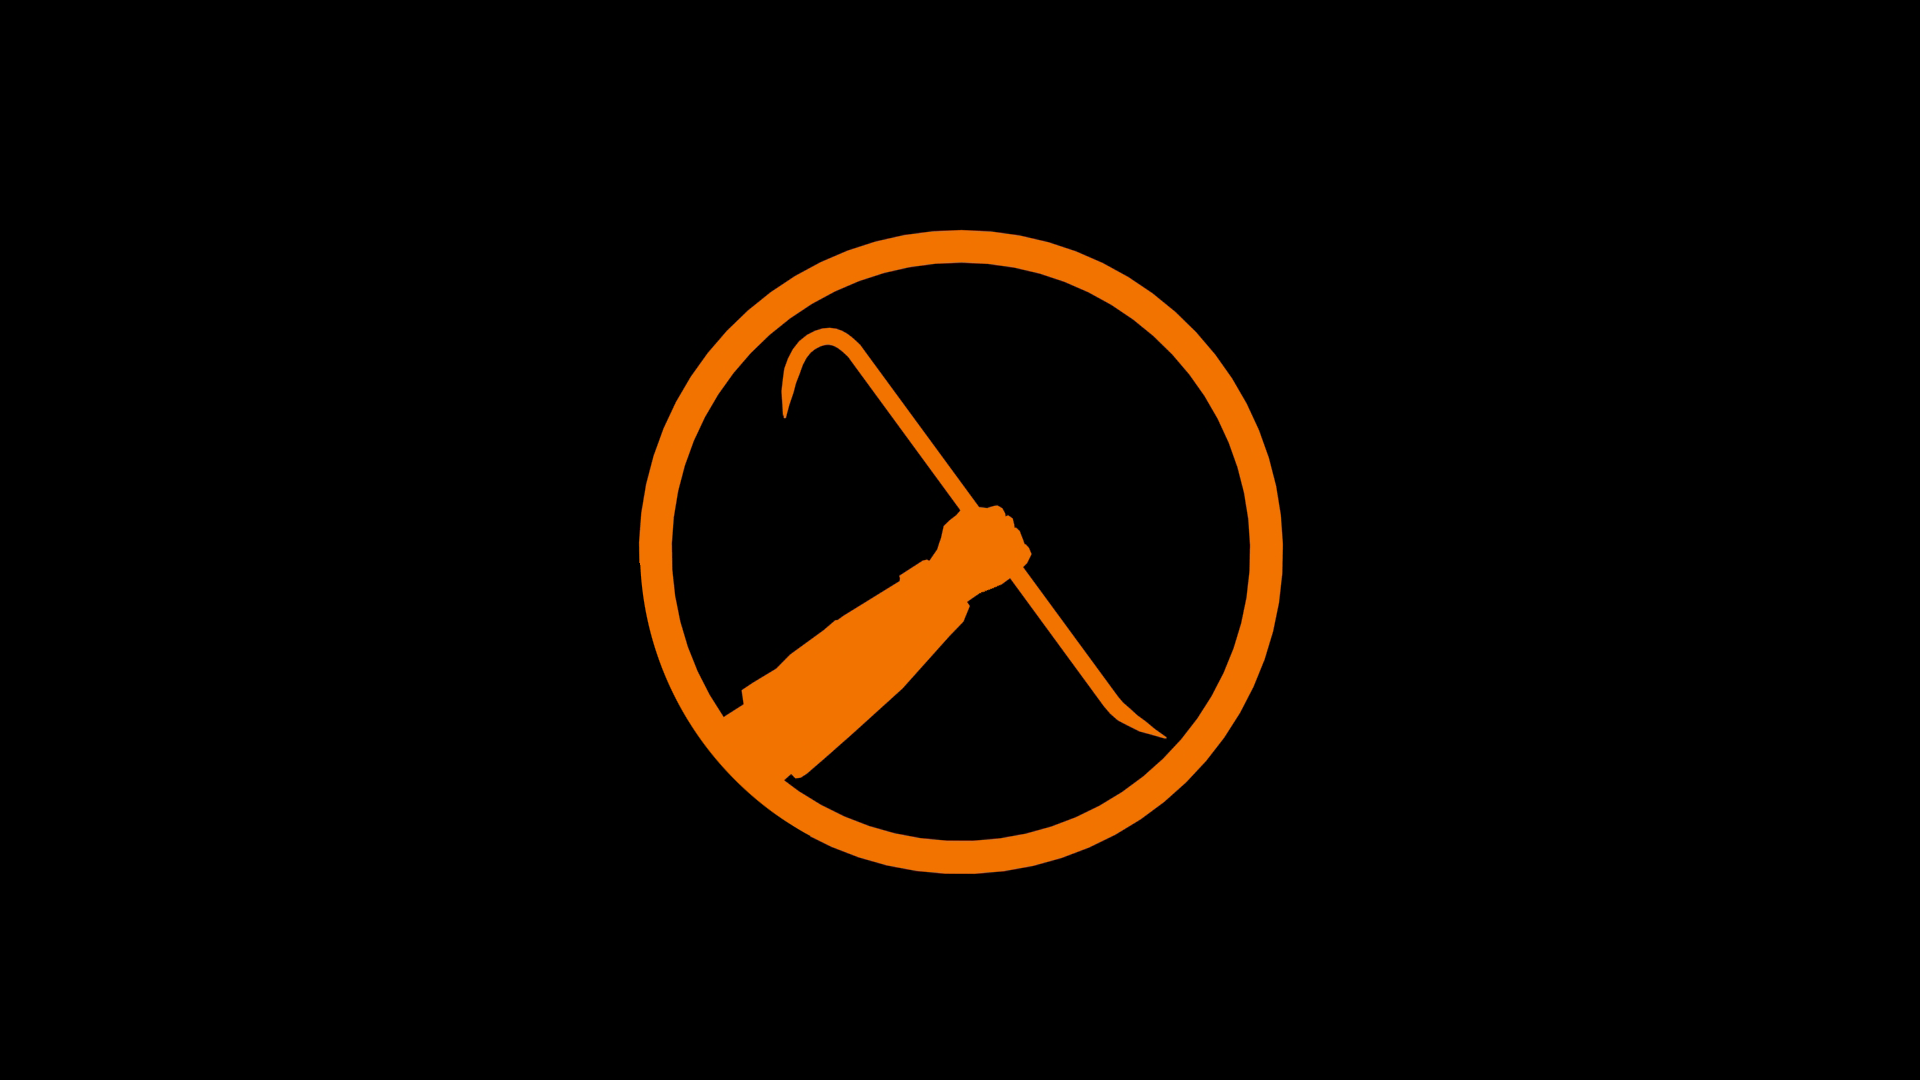 Some awesome half life 2 wallpaper